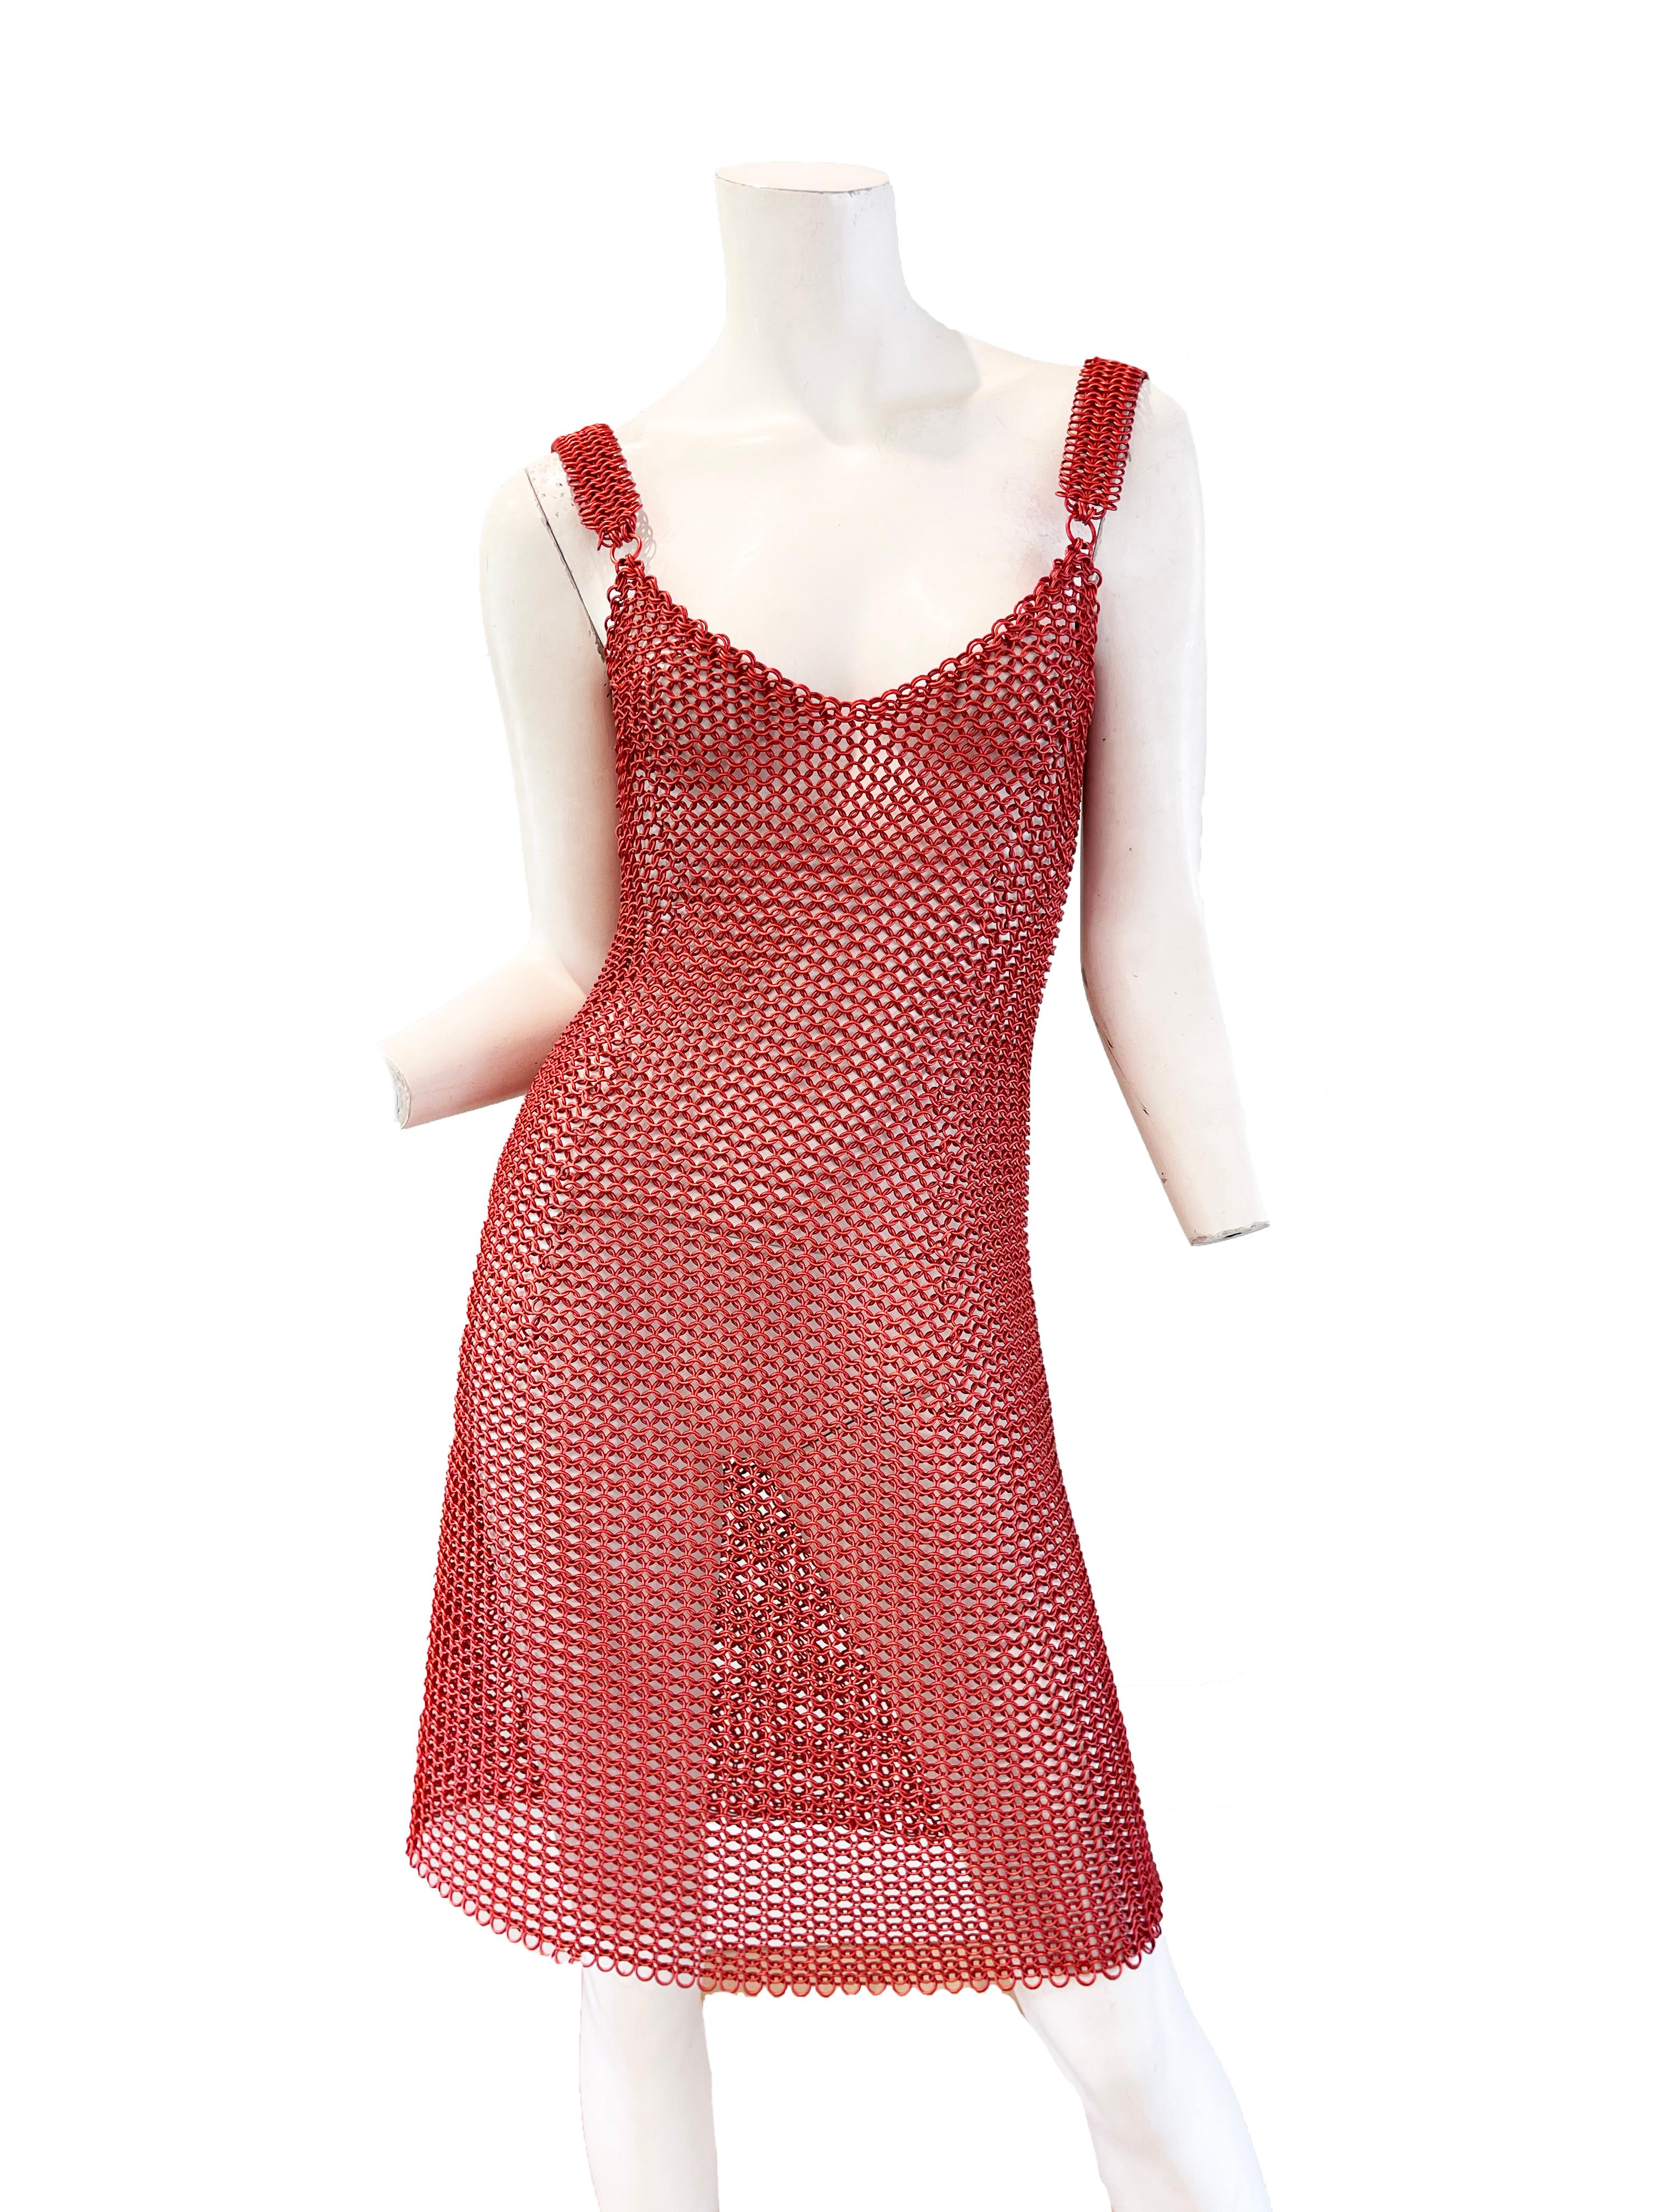 1995 F/W Todd Oldham red chainmail dress.

Size S/M
Condition: Excellent

